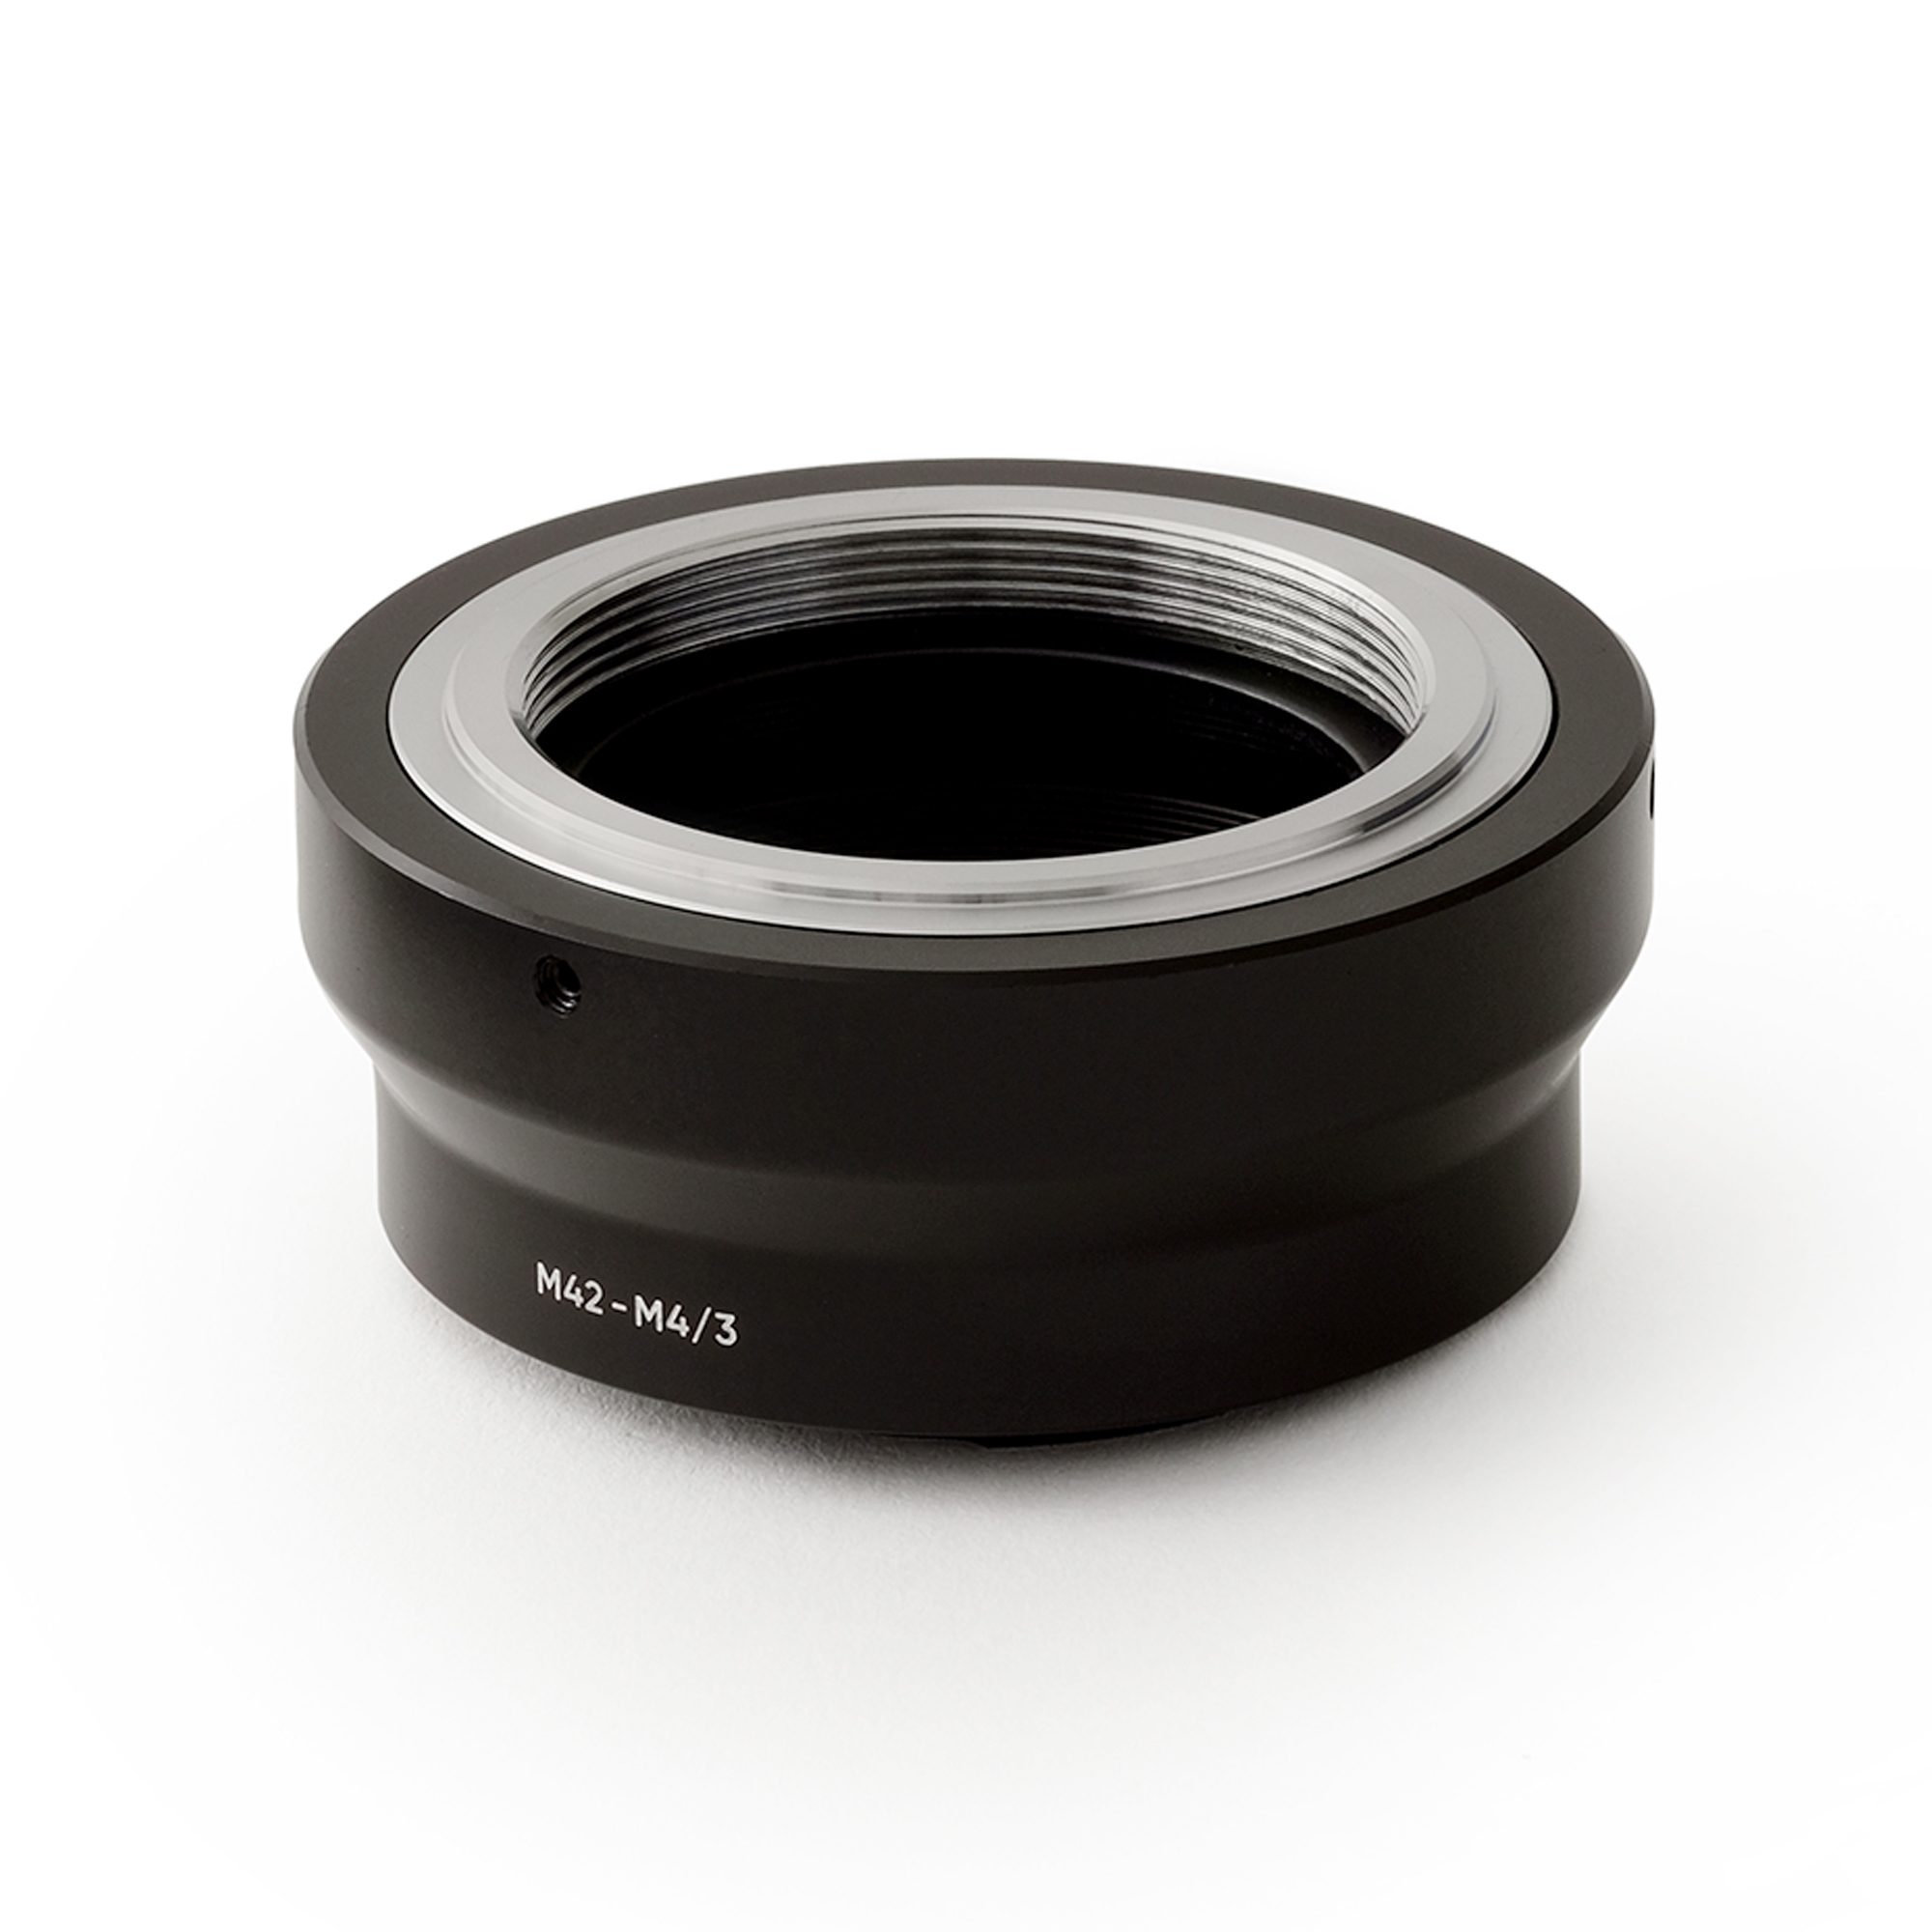 Urth Lens Adapter M42 Lens to M43 Mount